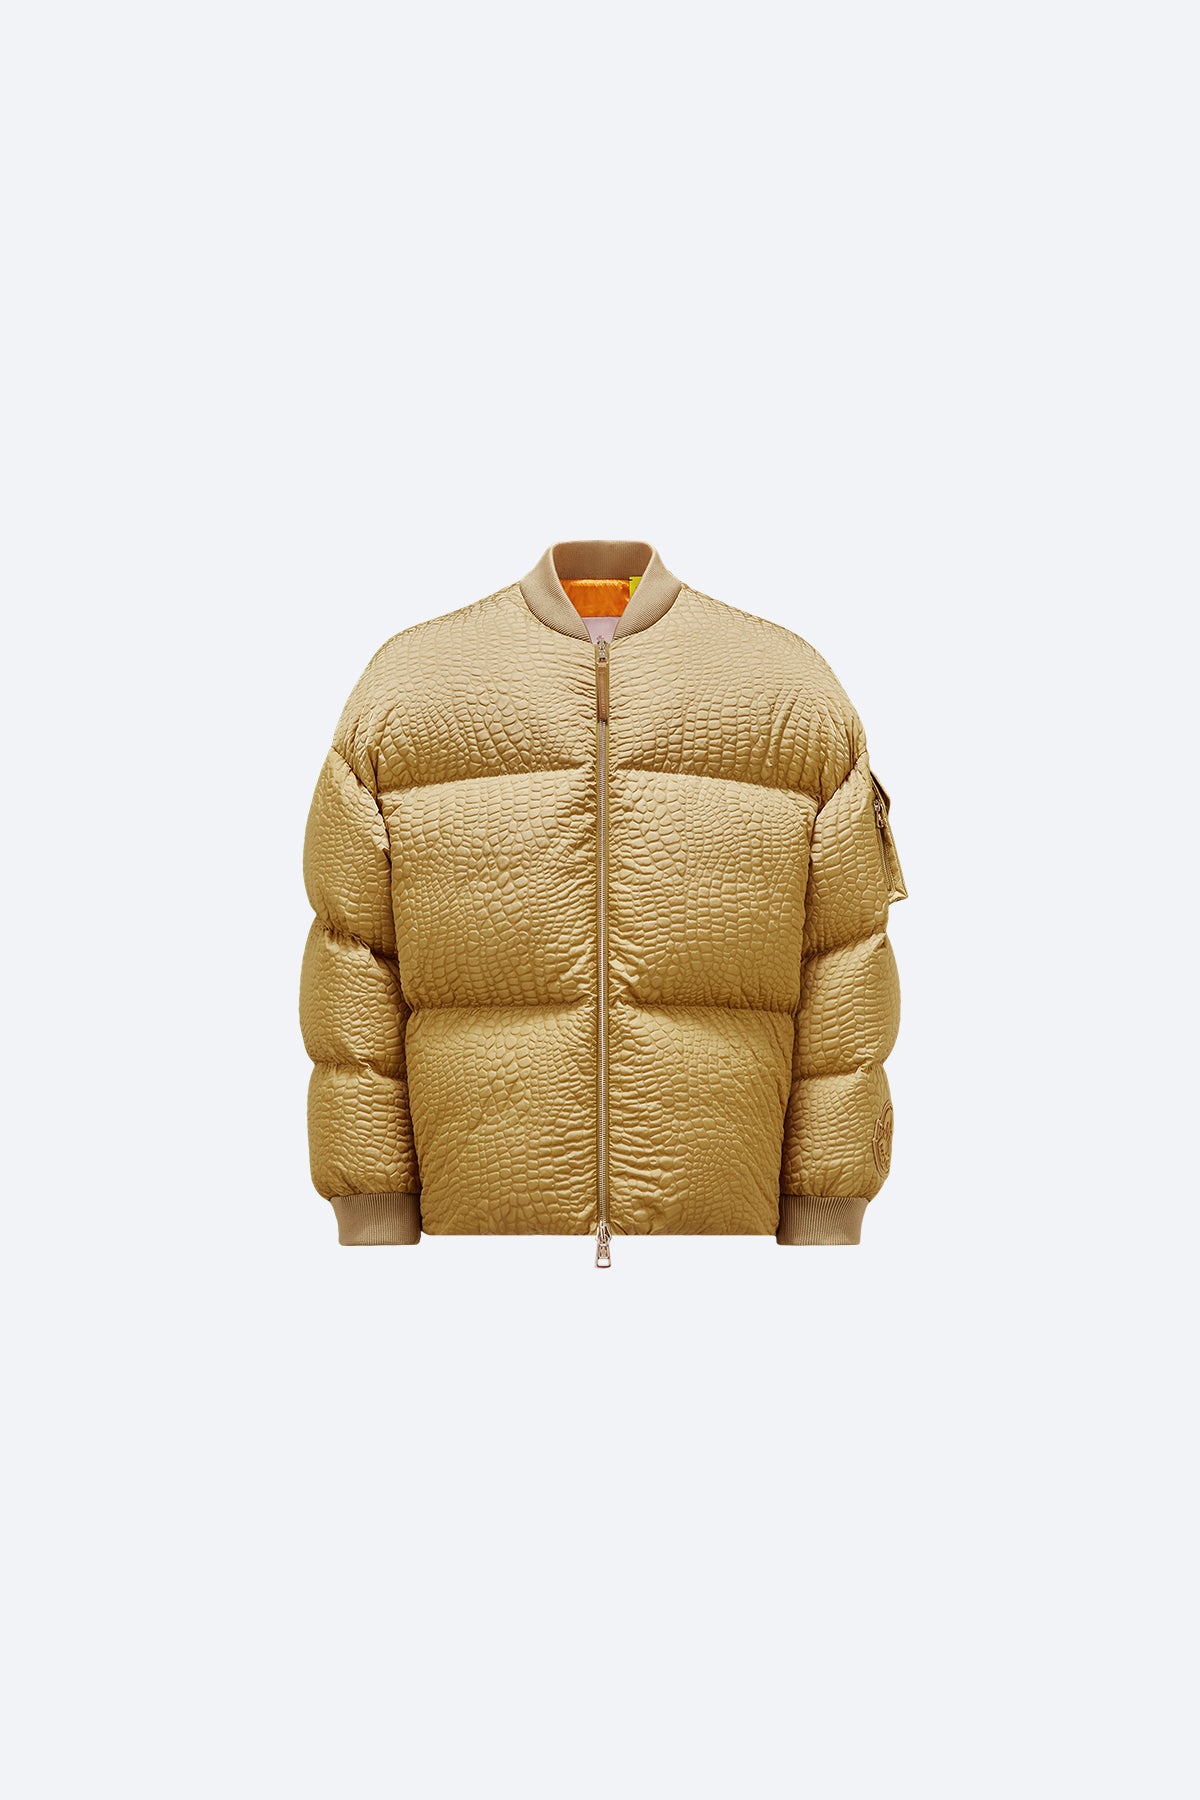 MONCLER X ROC NATION DESIGNED BY JAY-Z | CENTAURUS DOWN BOMBER JACKET